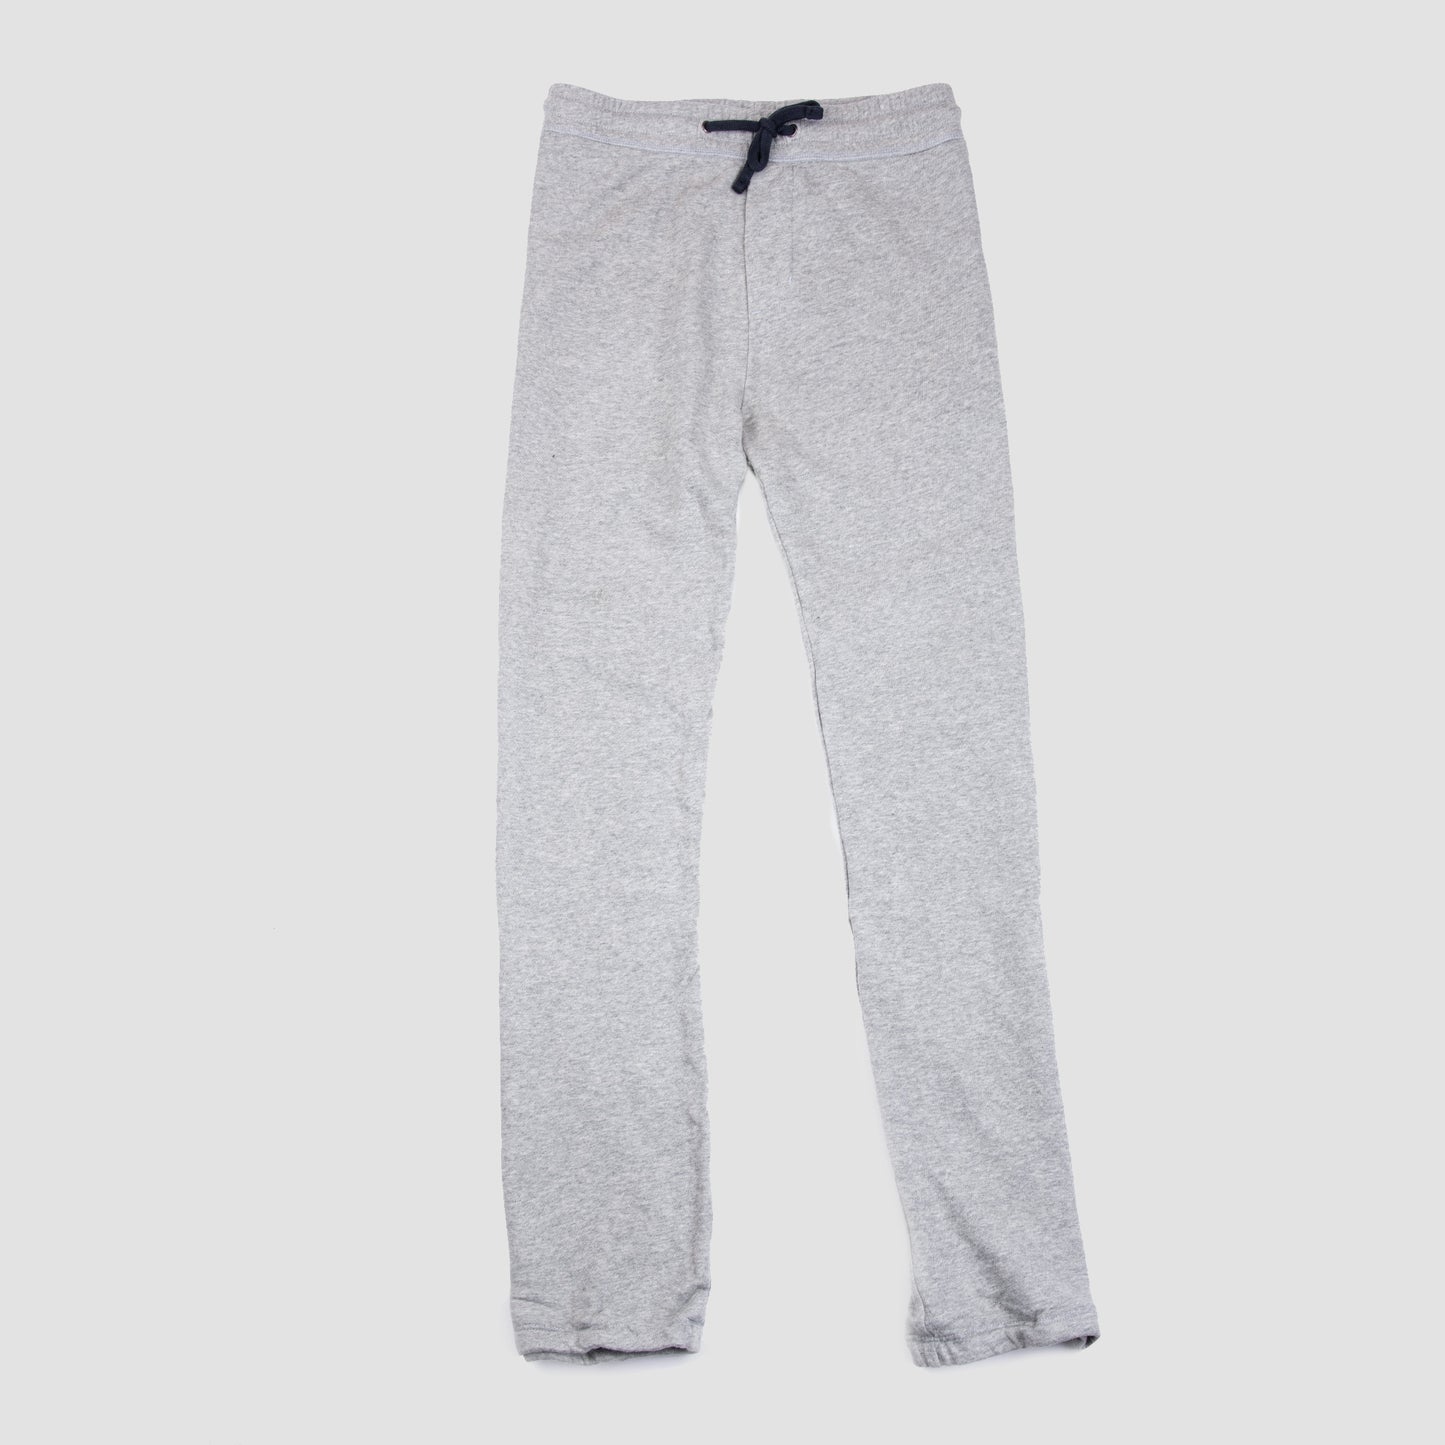 French Terry Sweatpant - Heather Grey